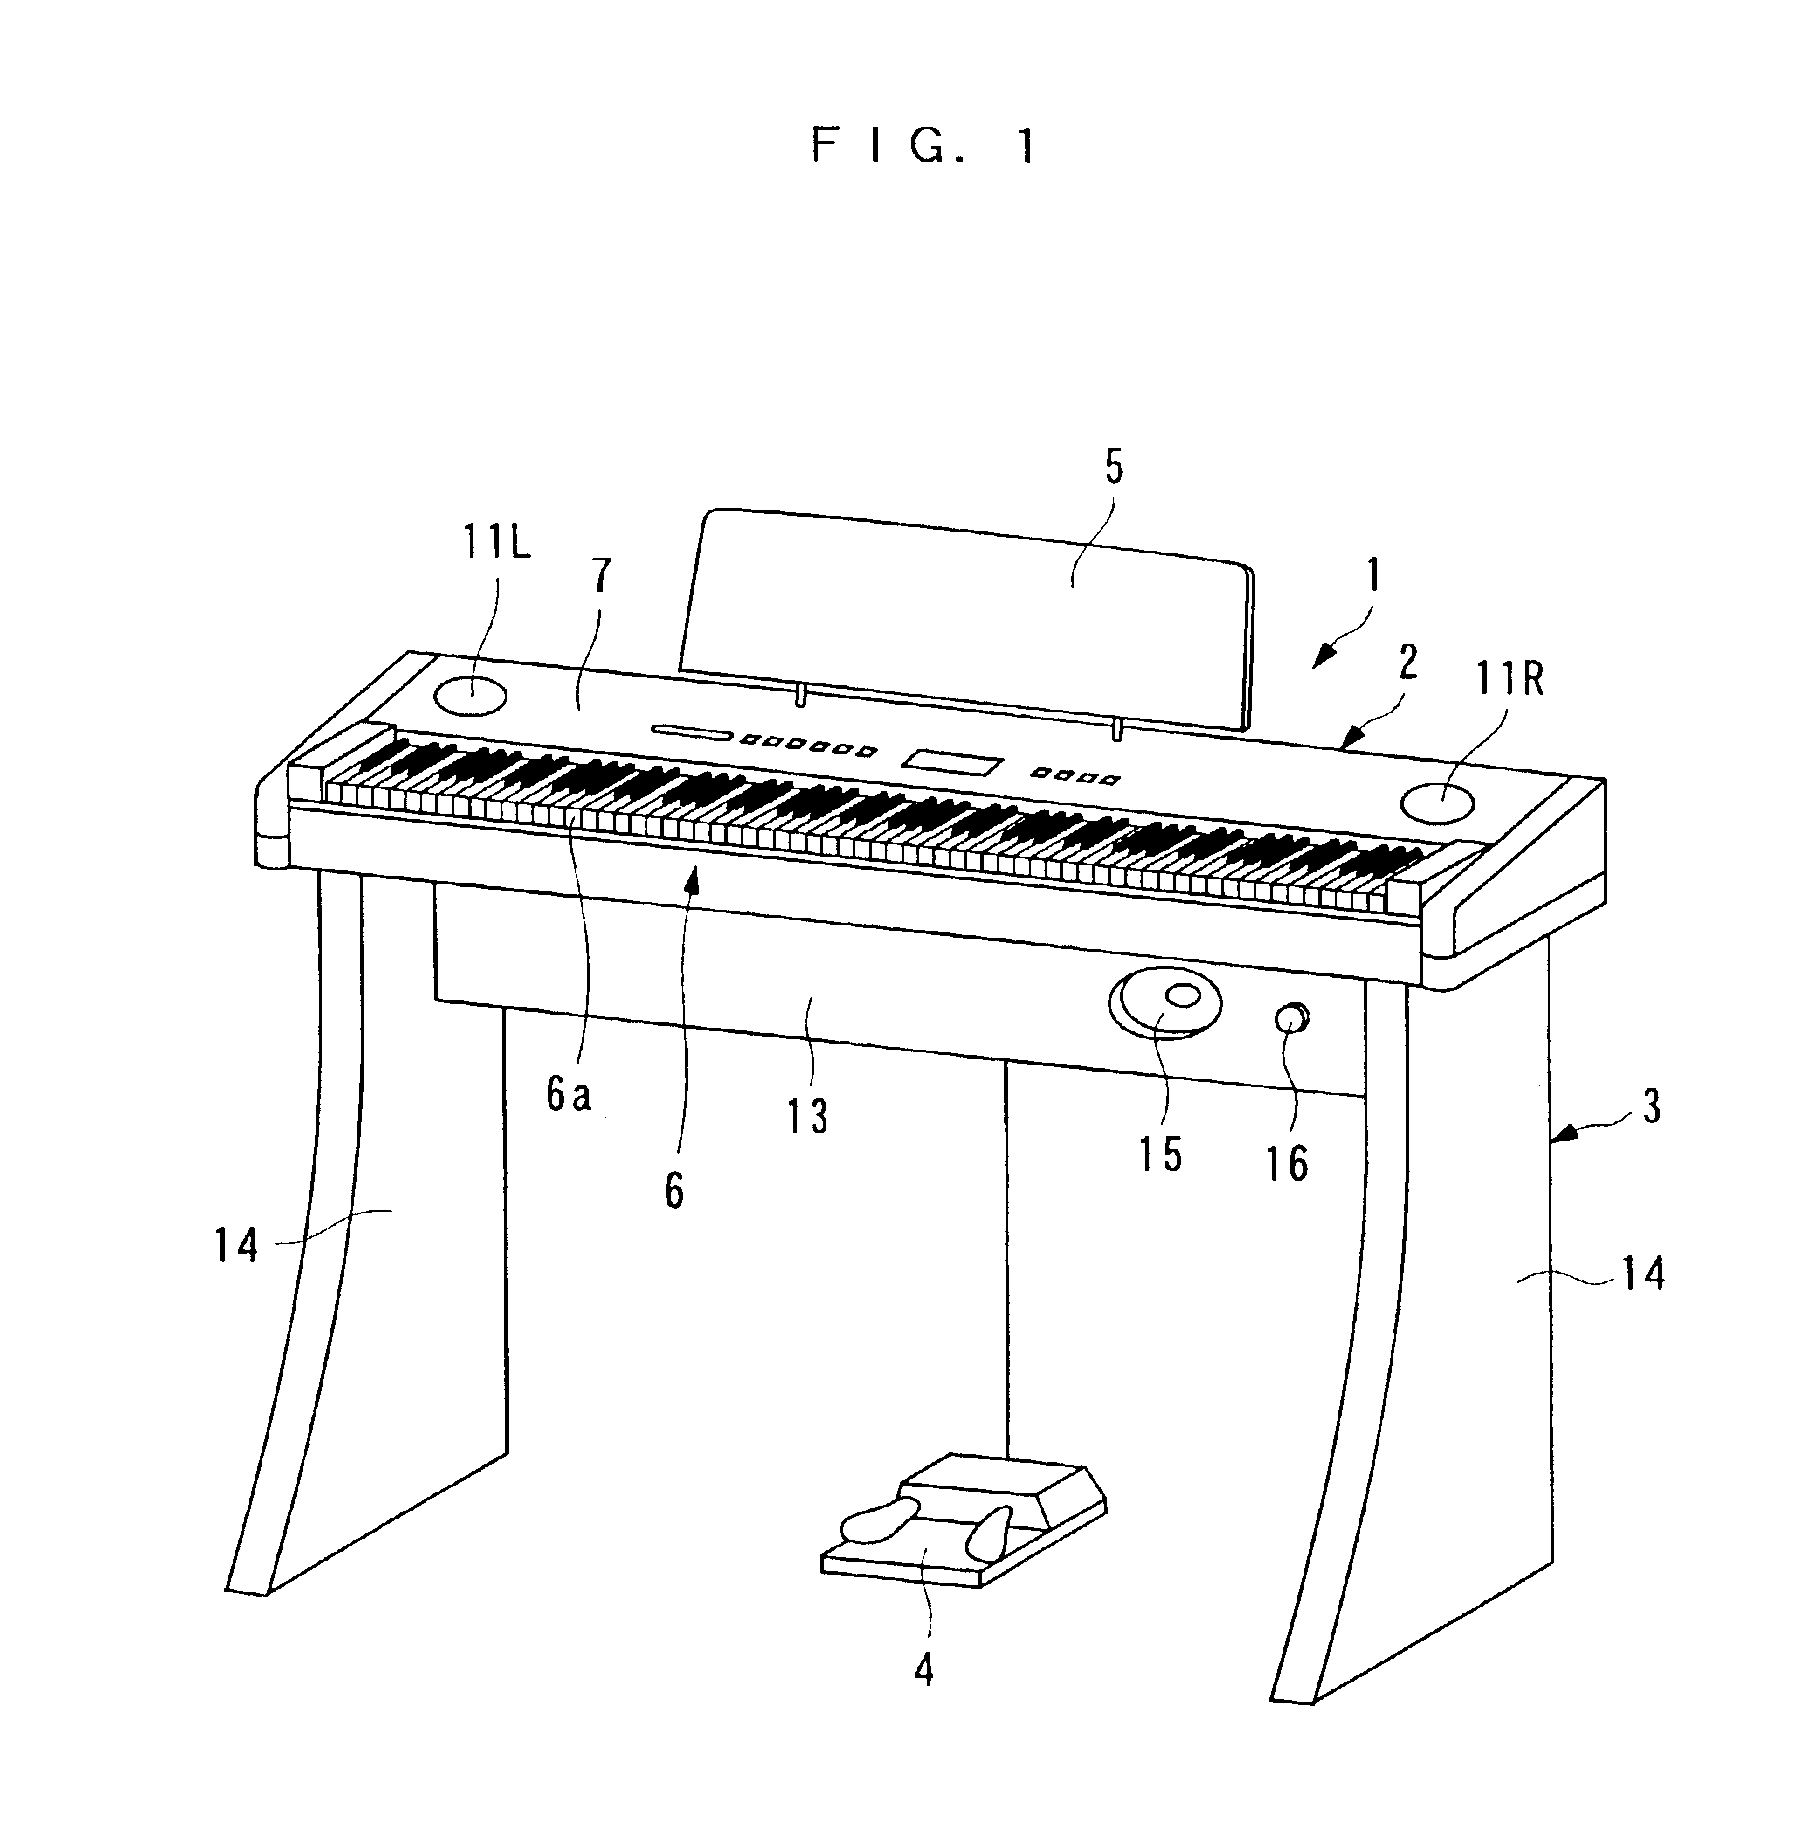 Acoustic control system for electronic musical instrument